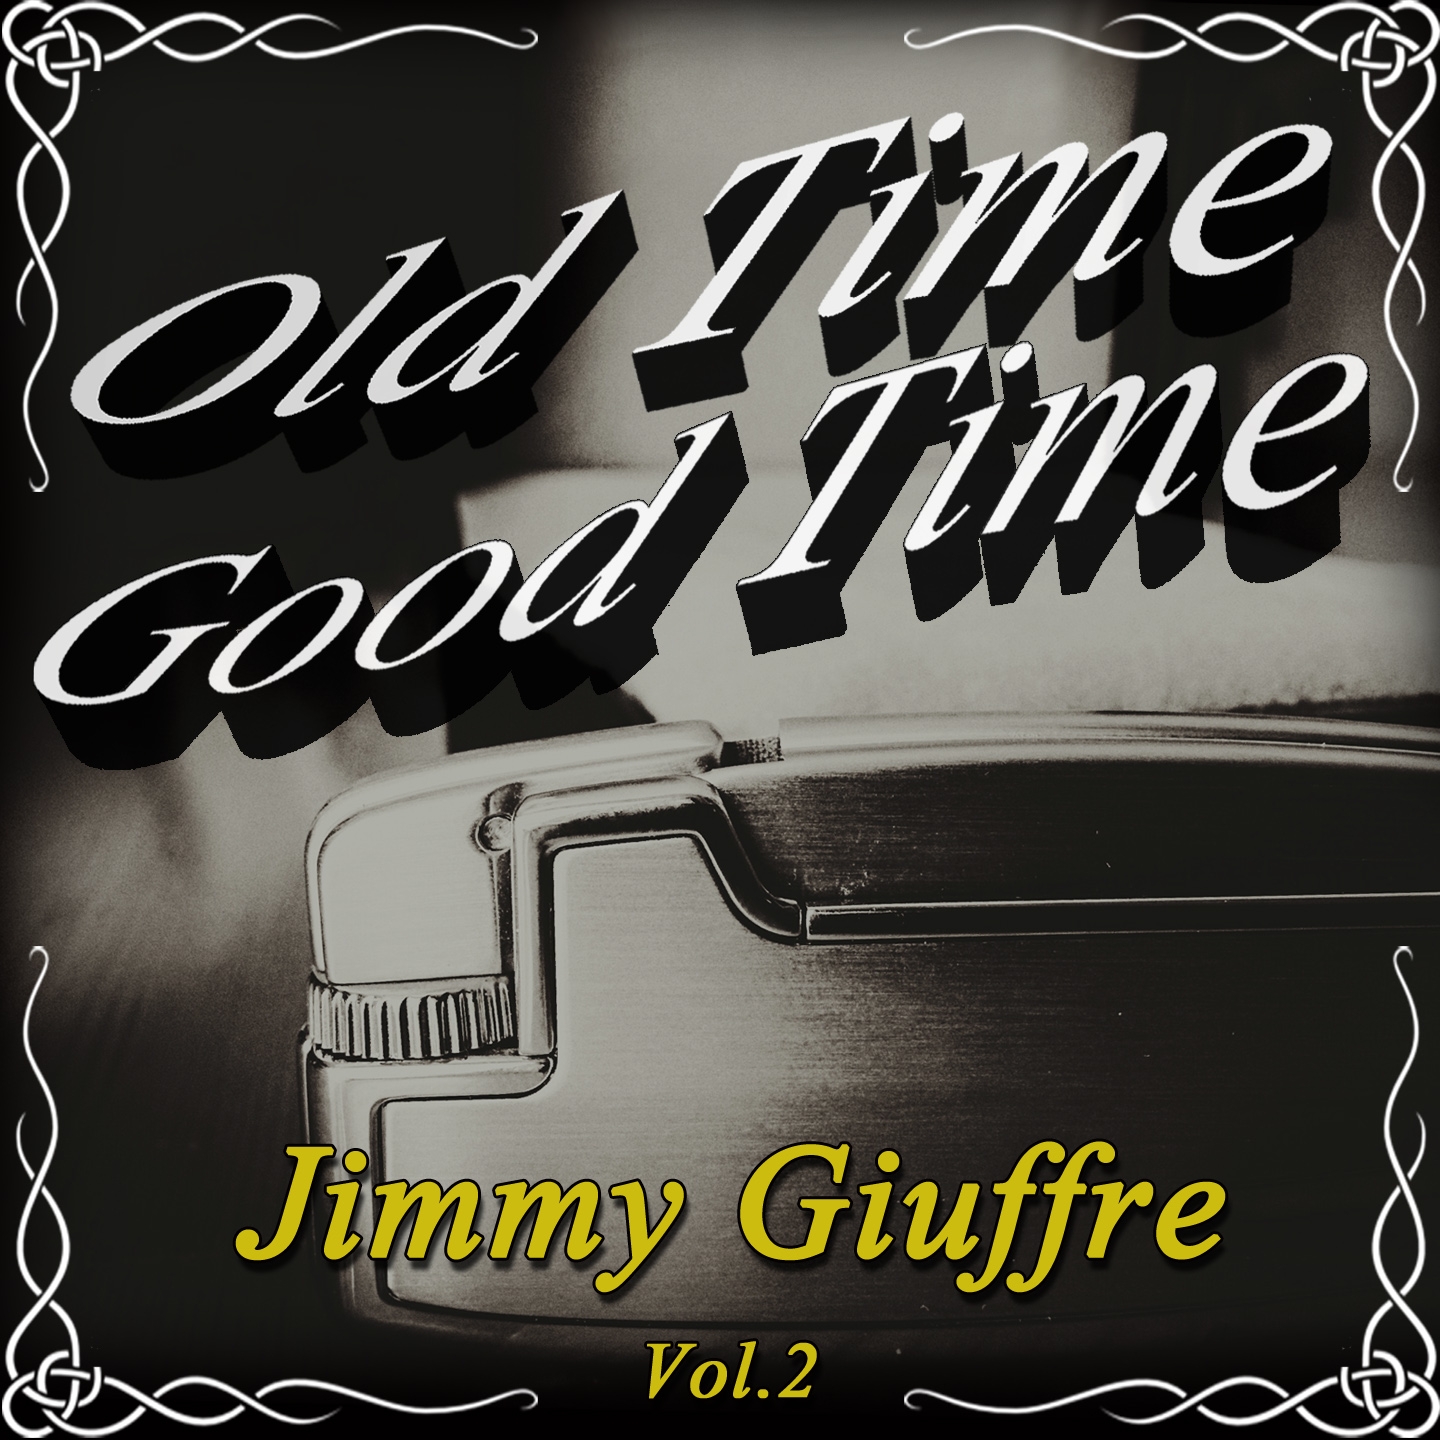 Old Time Good Time: Jimmy Giuffre, Vol. 2